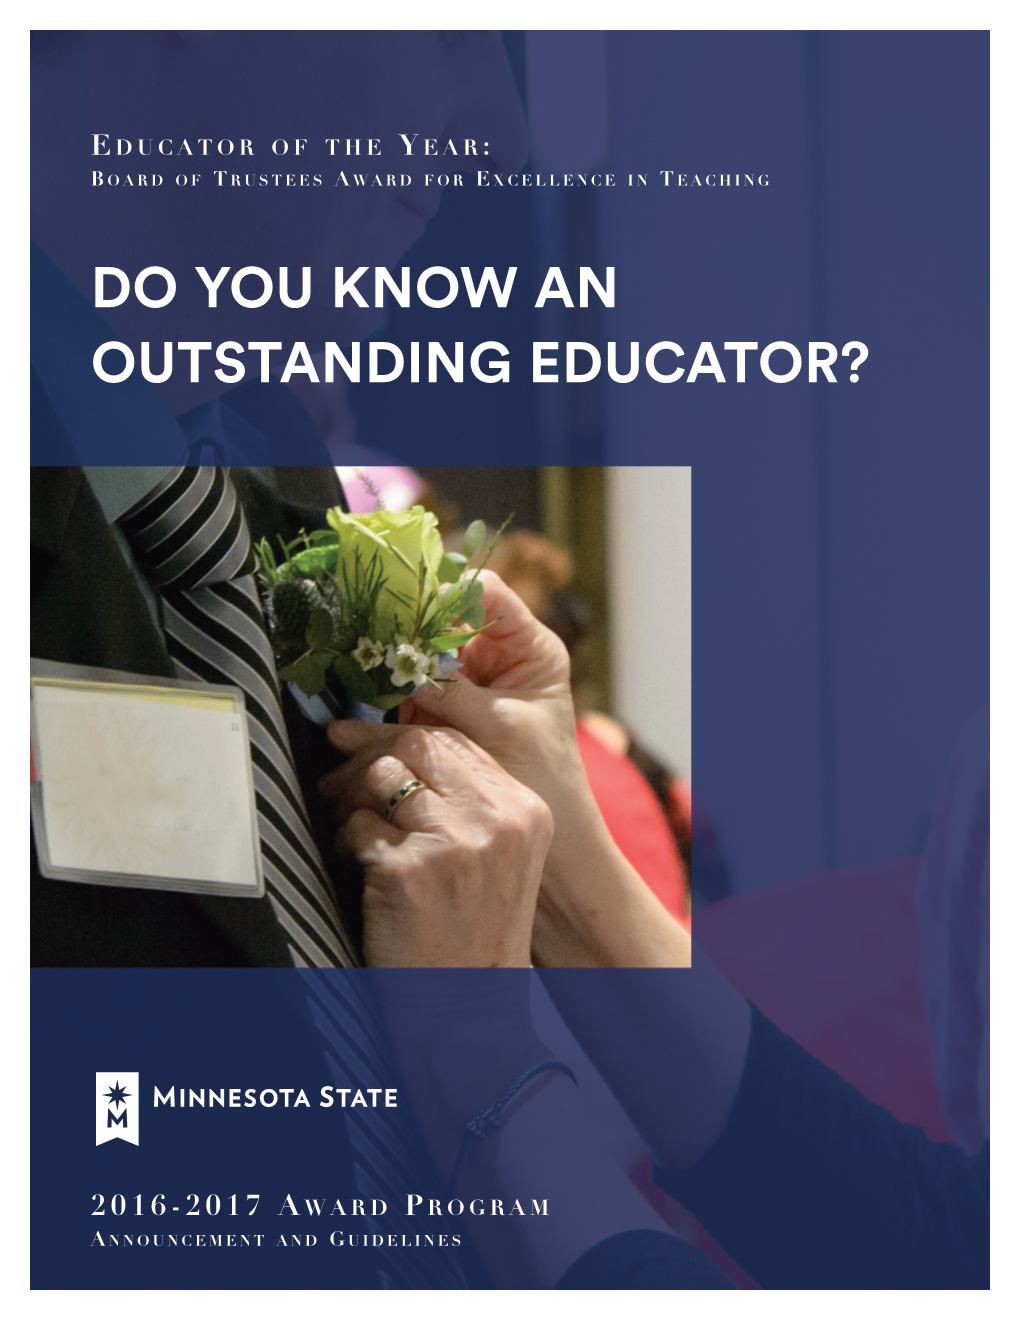 Do You Know an Outstanding Educator?